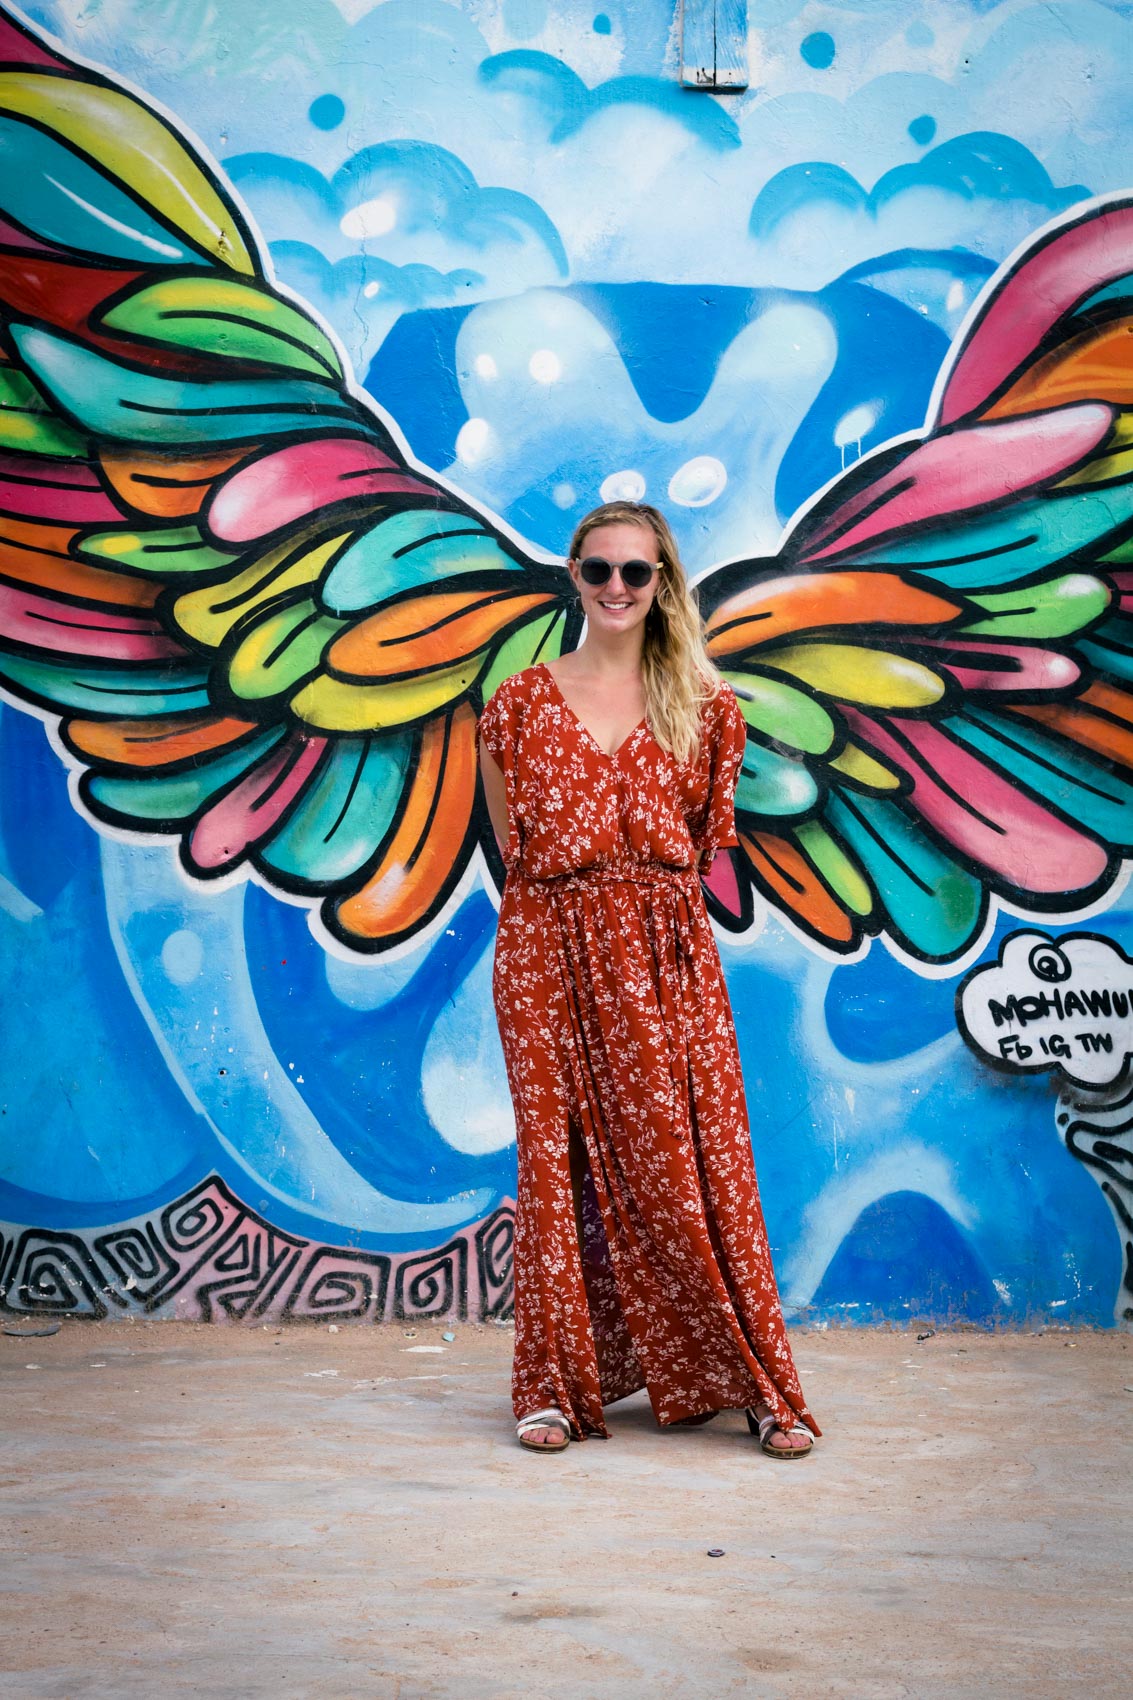 A glimpse into exploring Jamestown - a historically rich fishing community in Accra, Ghana - while wearing a burnt orange maxi dress.